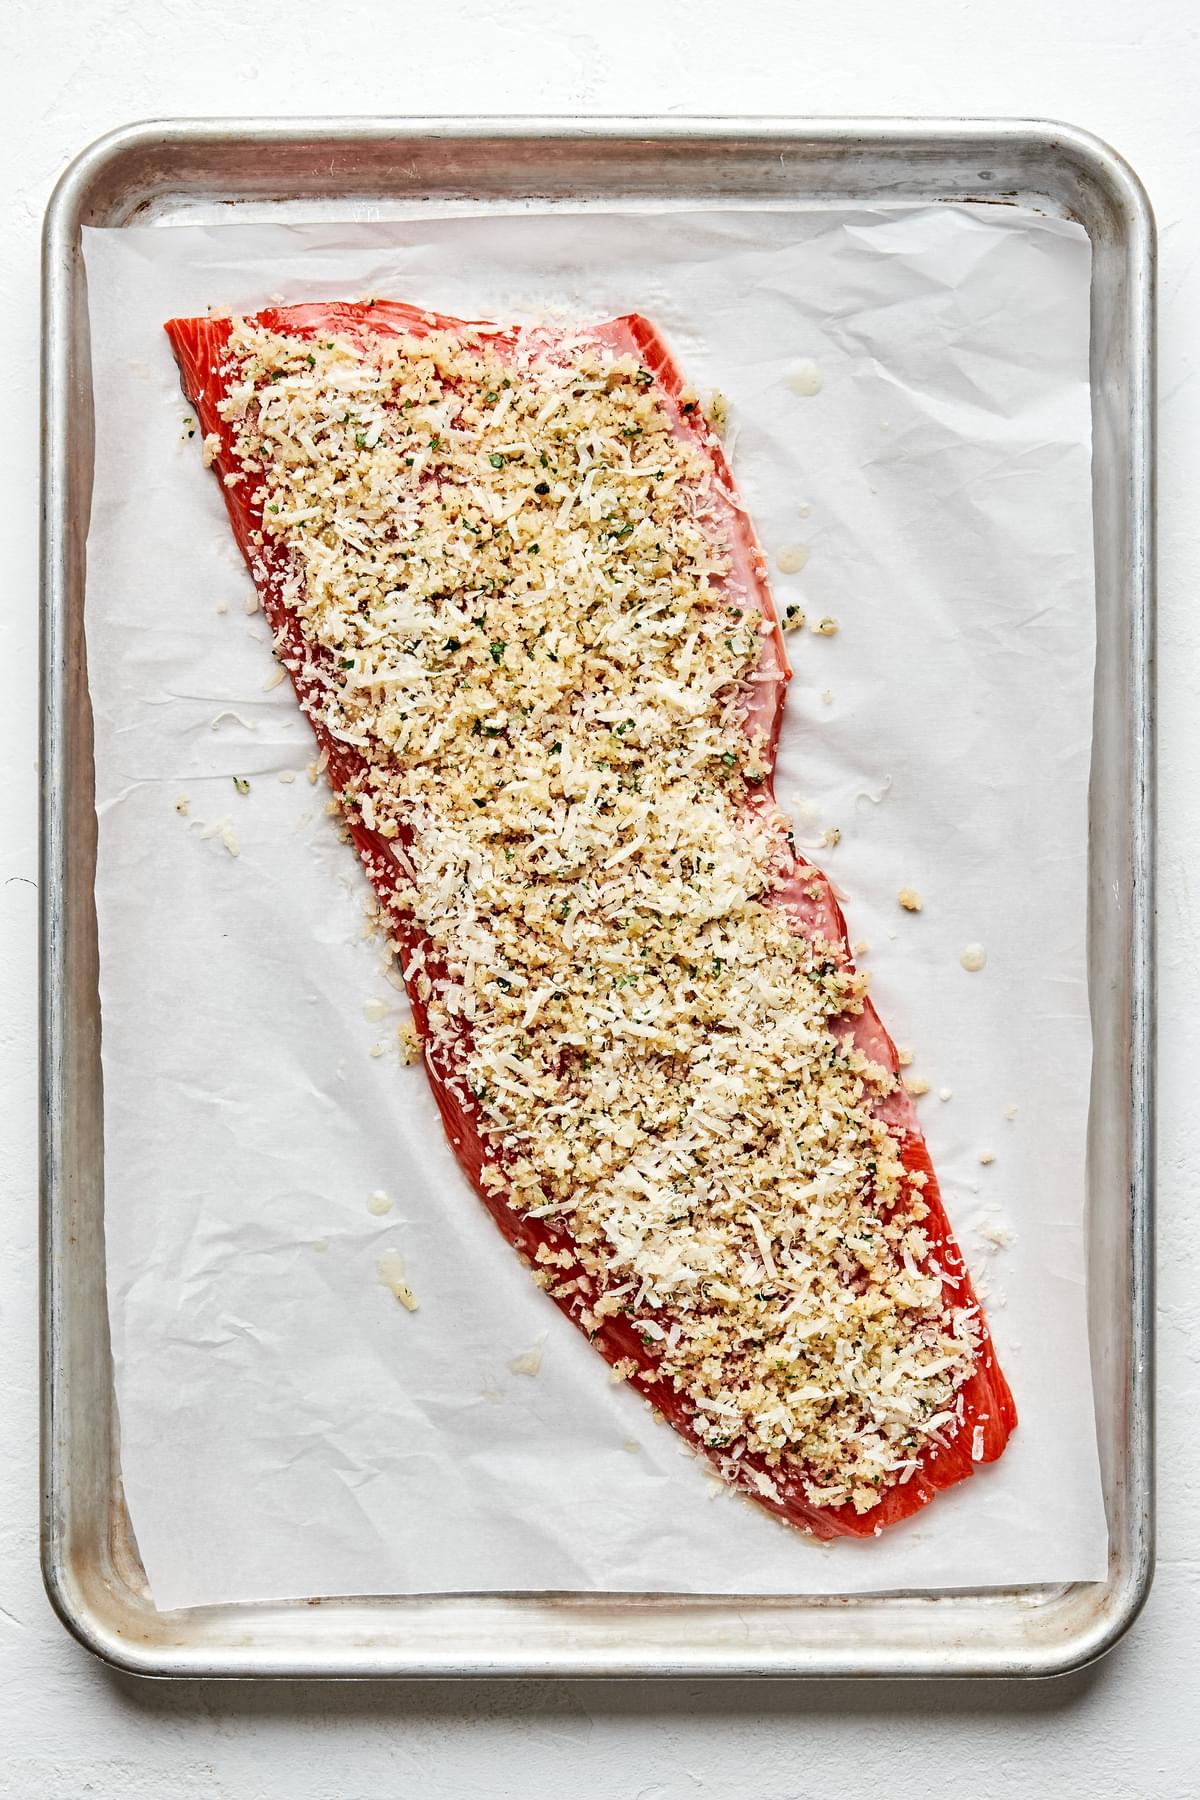 salmon brushed with melted butter, coated with panko, garlic powder, parsley, salt, pepper & parmesan on a baking sheet